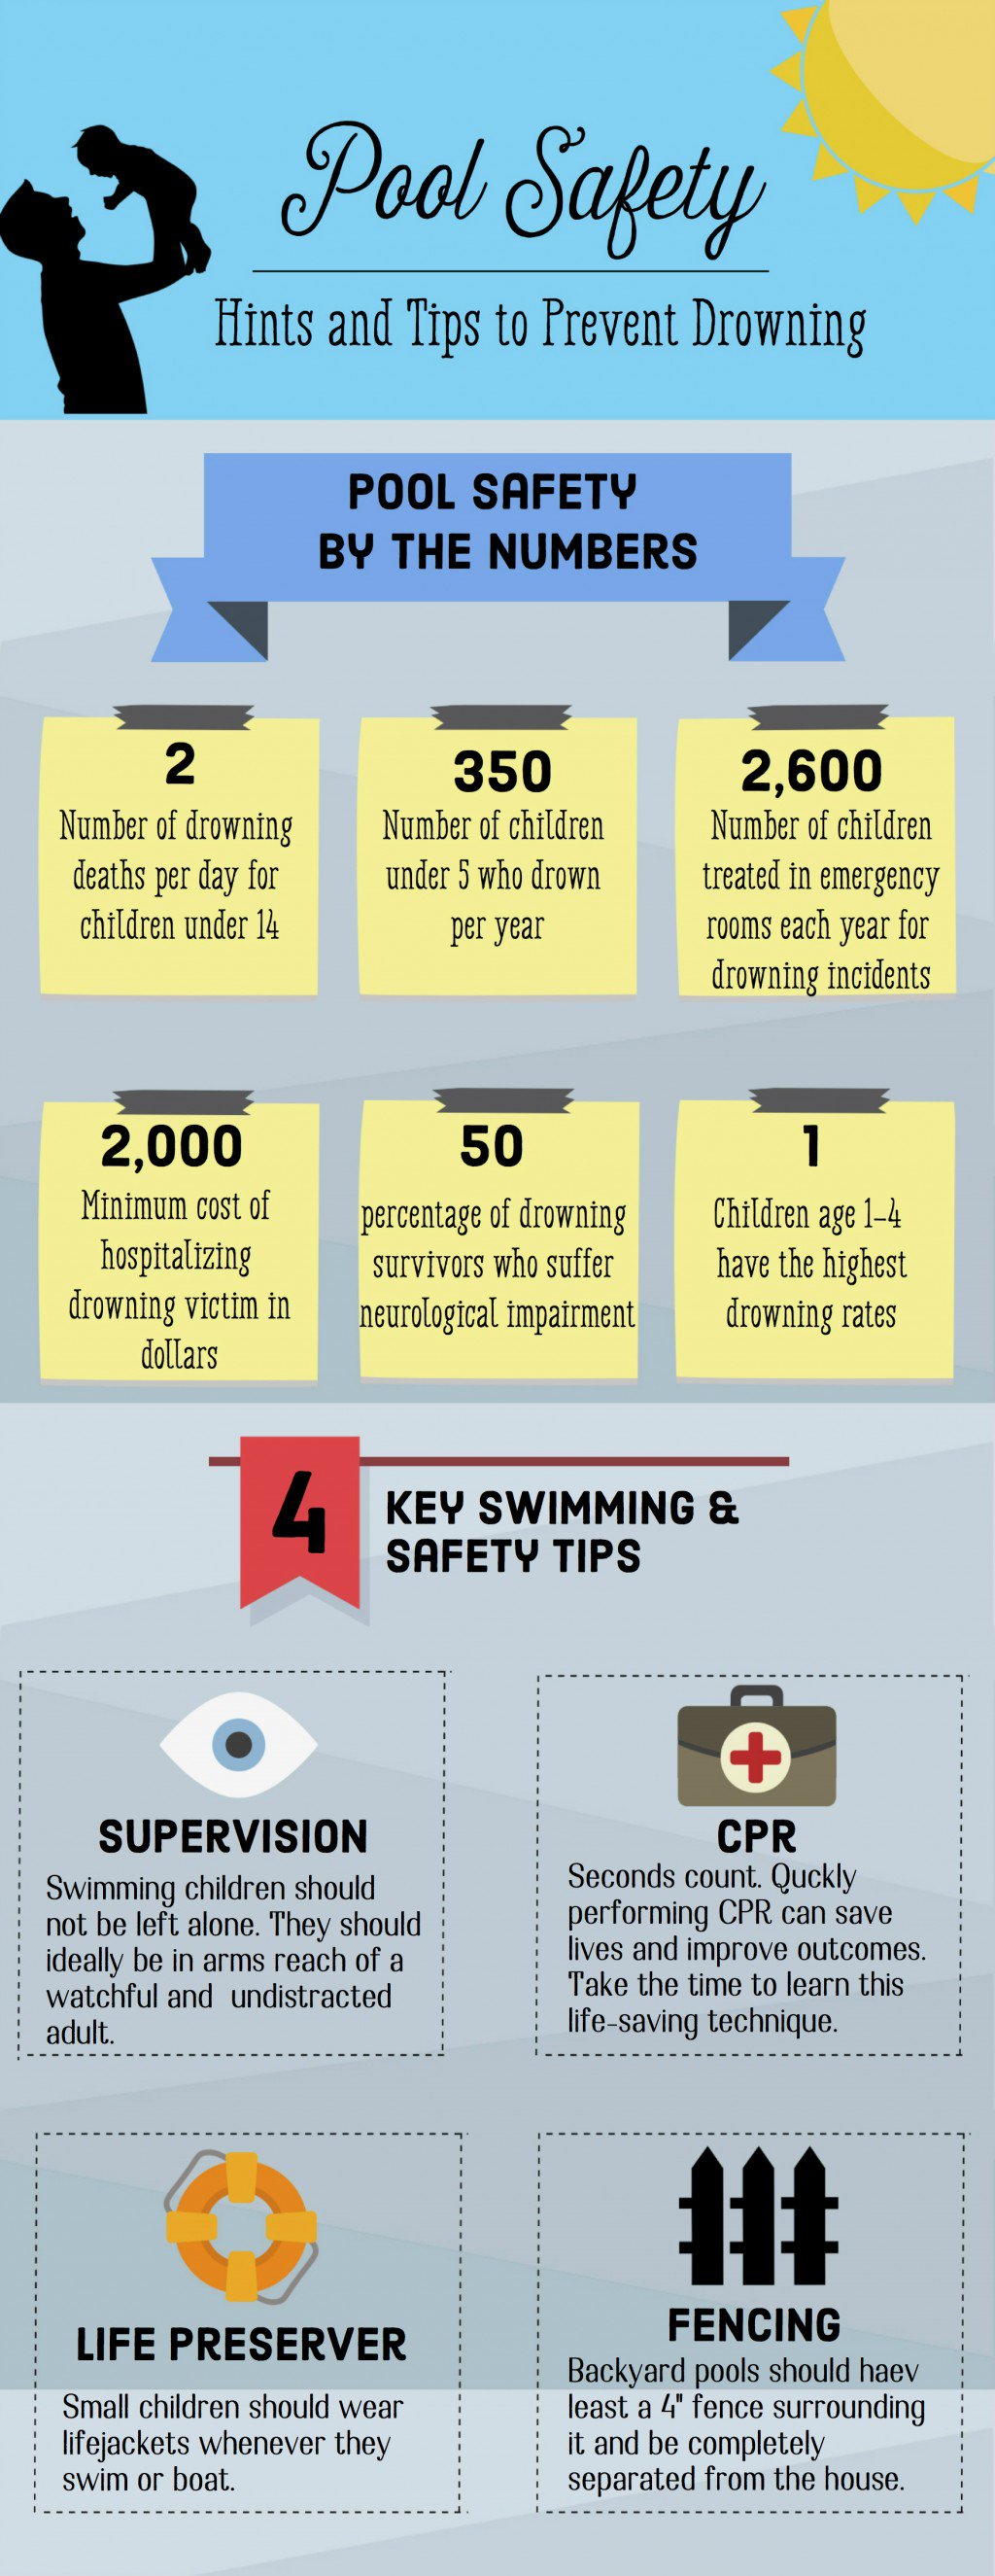 pool safety, hints and tips to prevent drowning